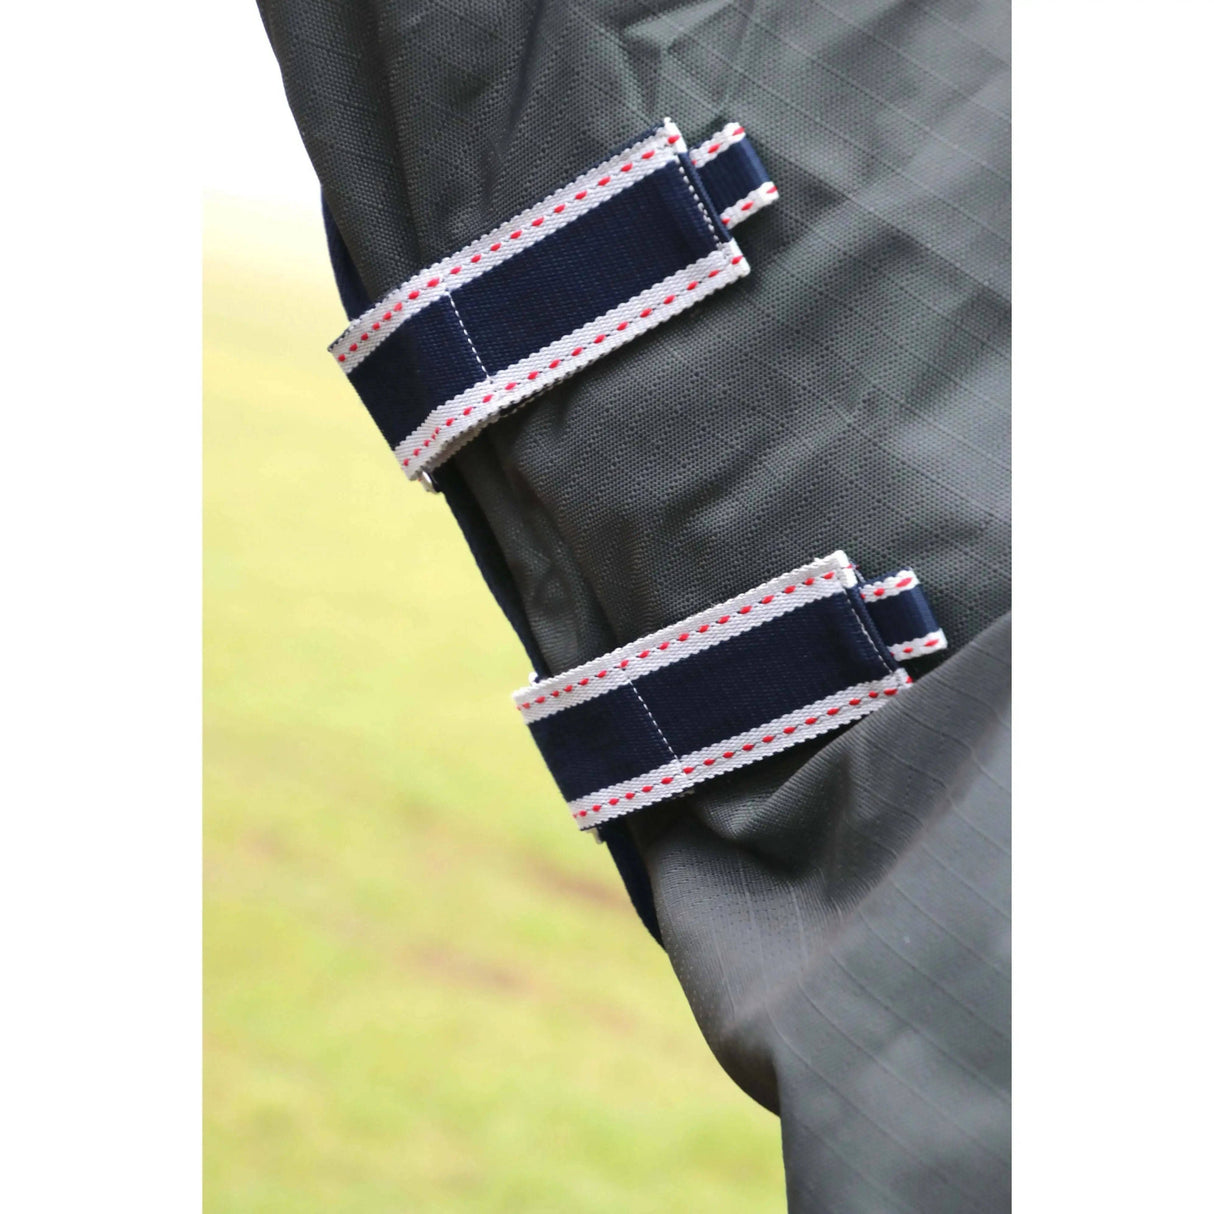 DefenceX System 50 Turnout Rug with Detachable Neck Cover Dark Grey / Dark Teal 5'6' HY Equestrian Turnout Rugs Barnstaple Equestrian Supplies